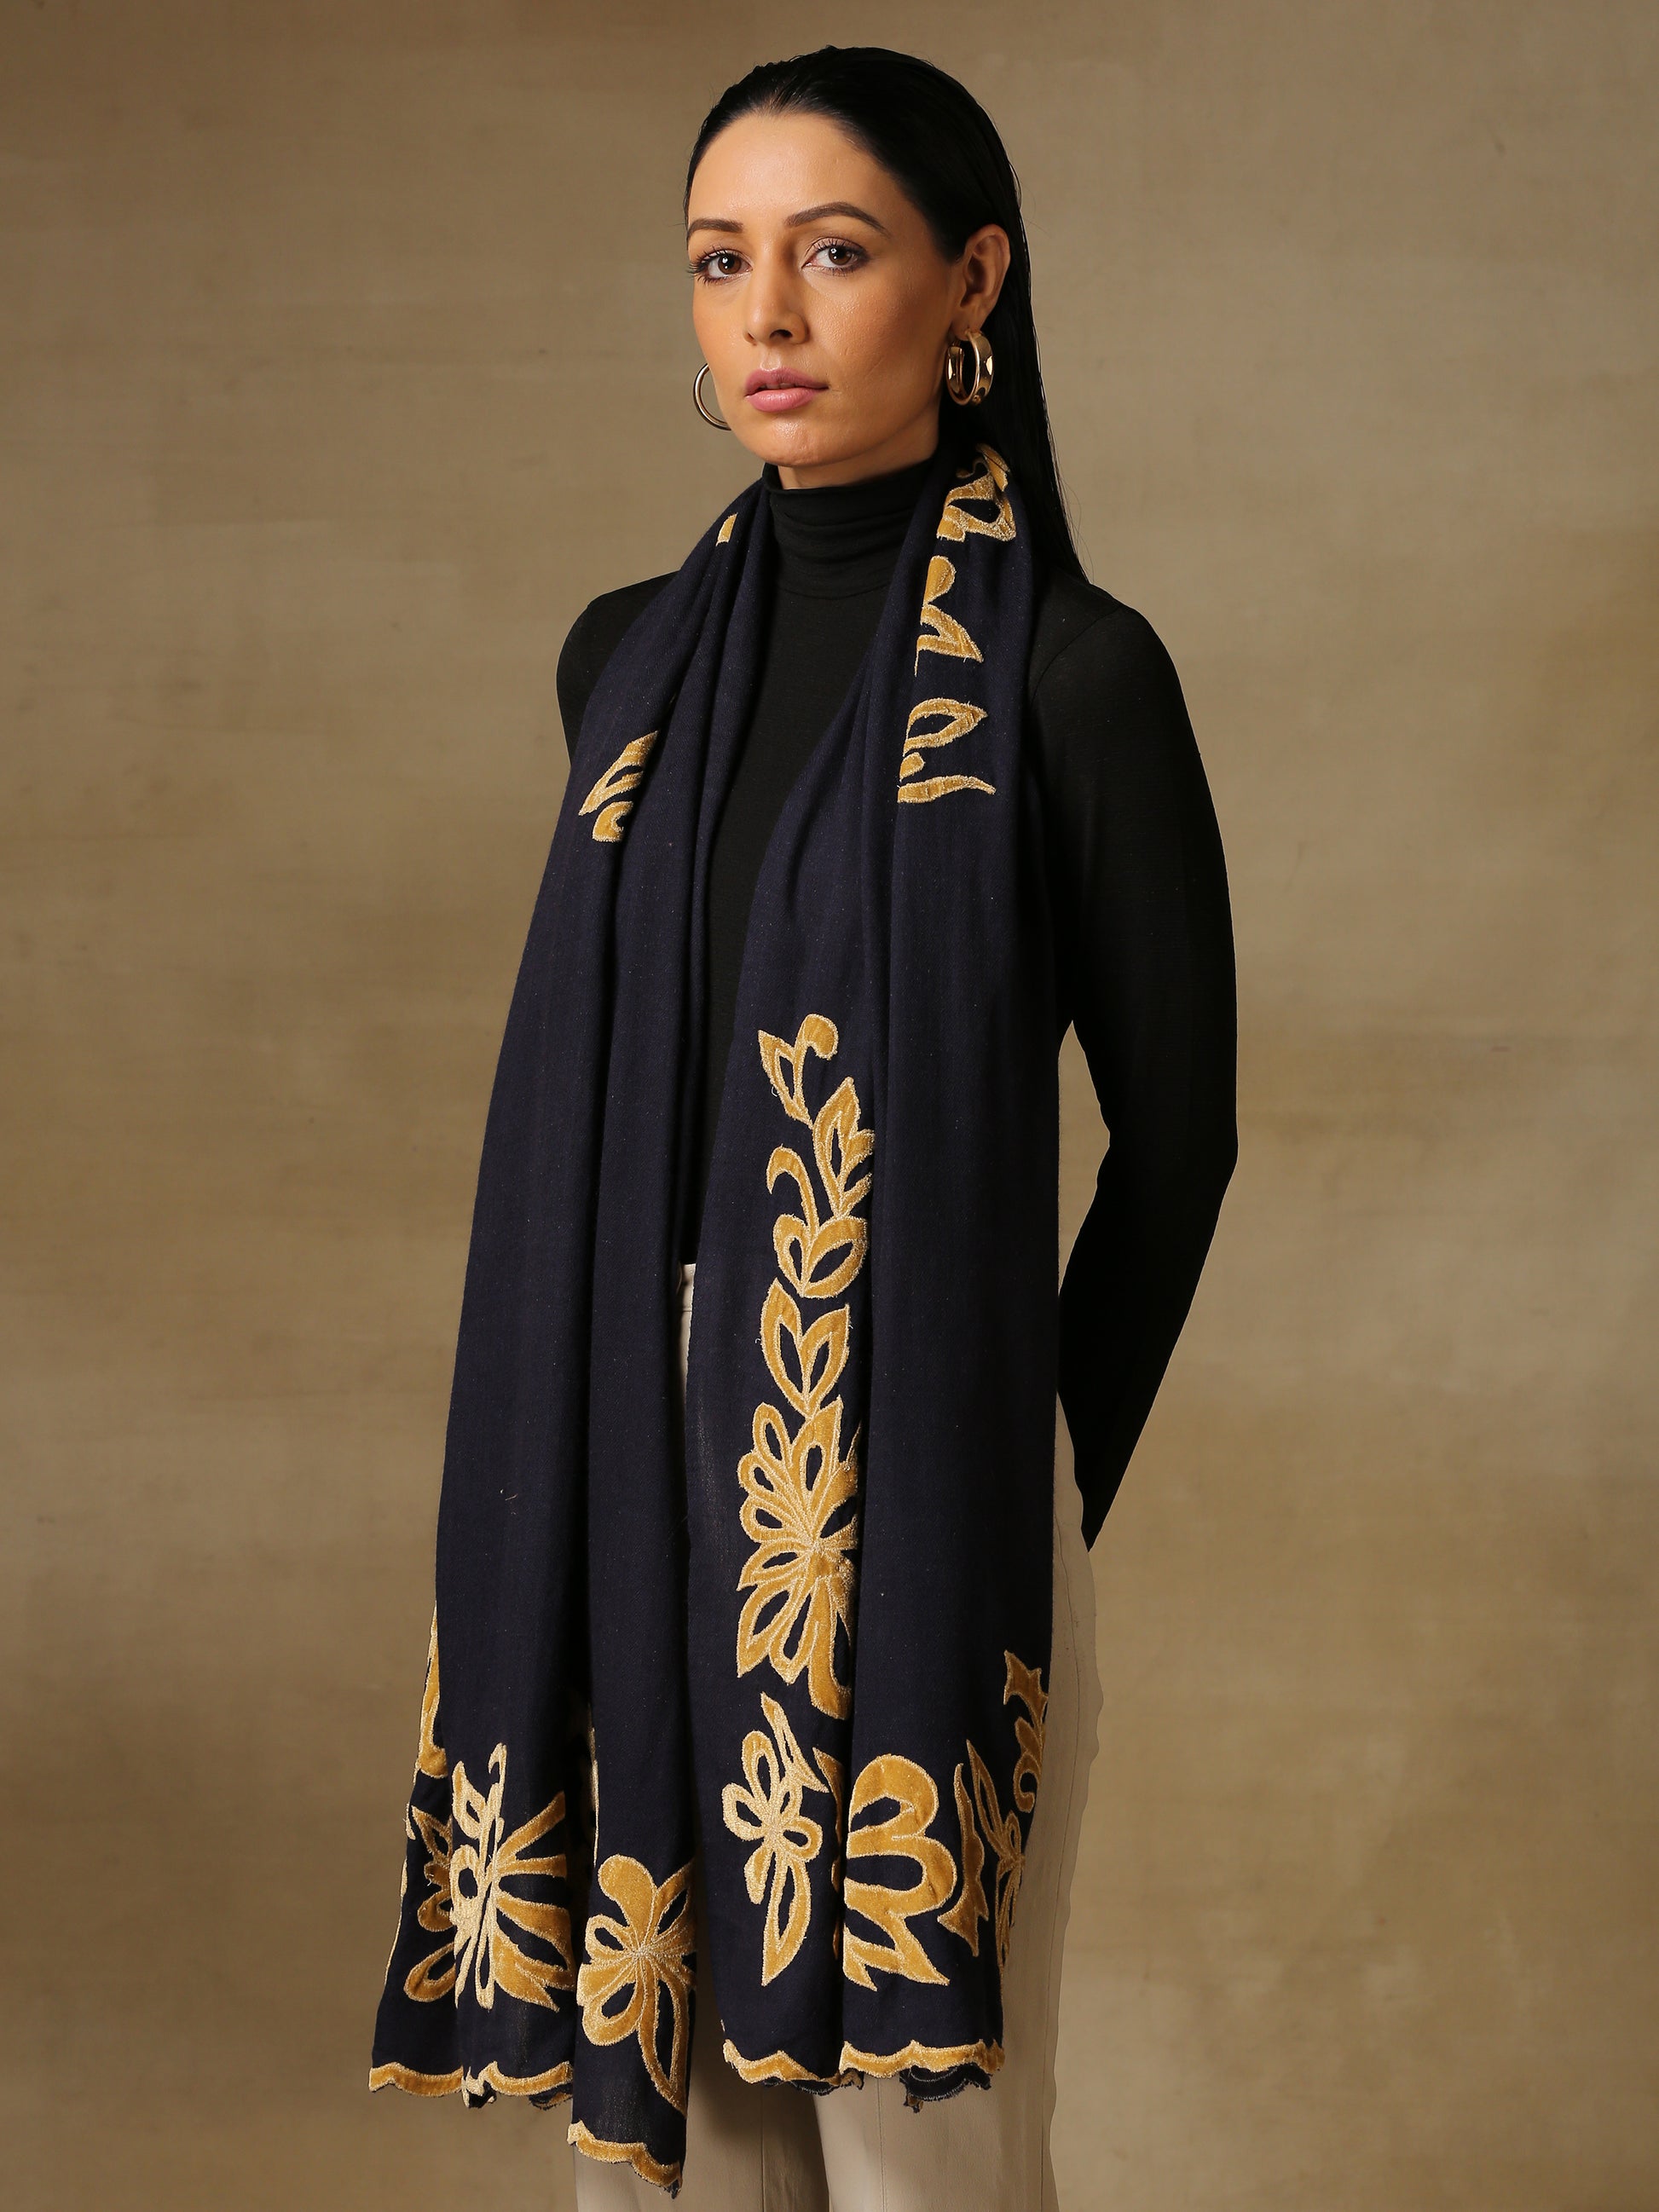 Model is wearing a Velvet Affair stole from Shaza featuring yellow velvet applique on a midnight blue coloured cashmere stole. 